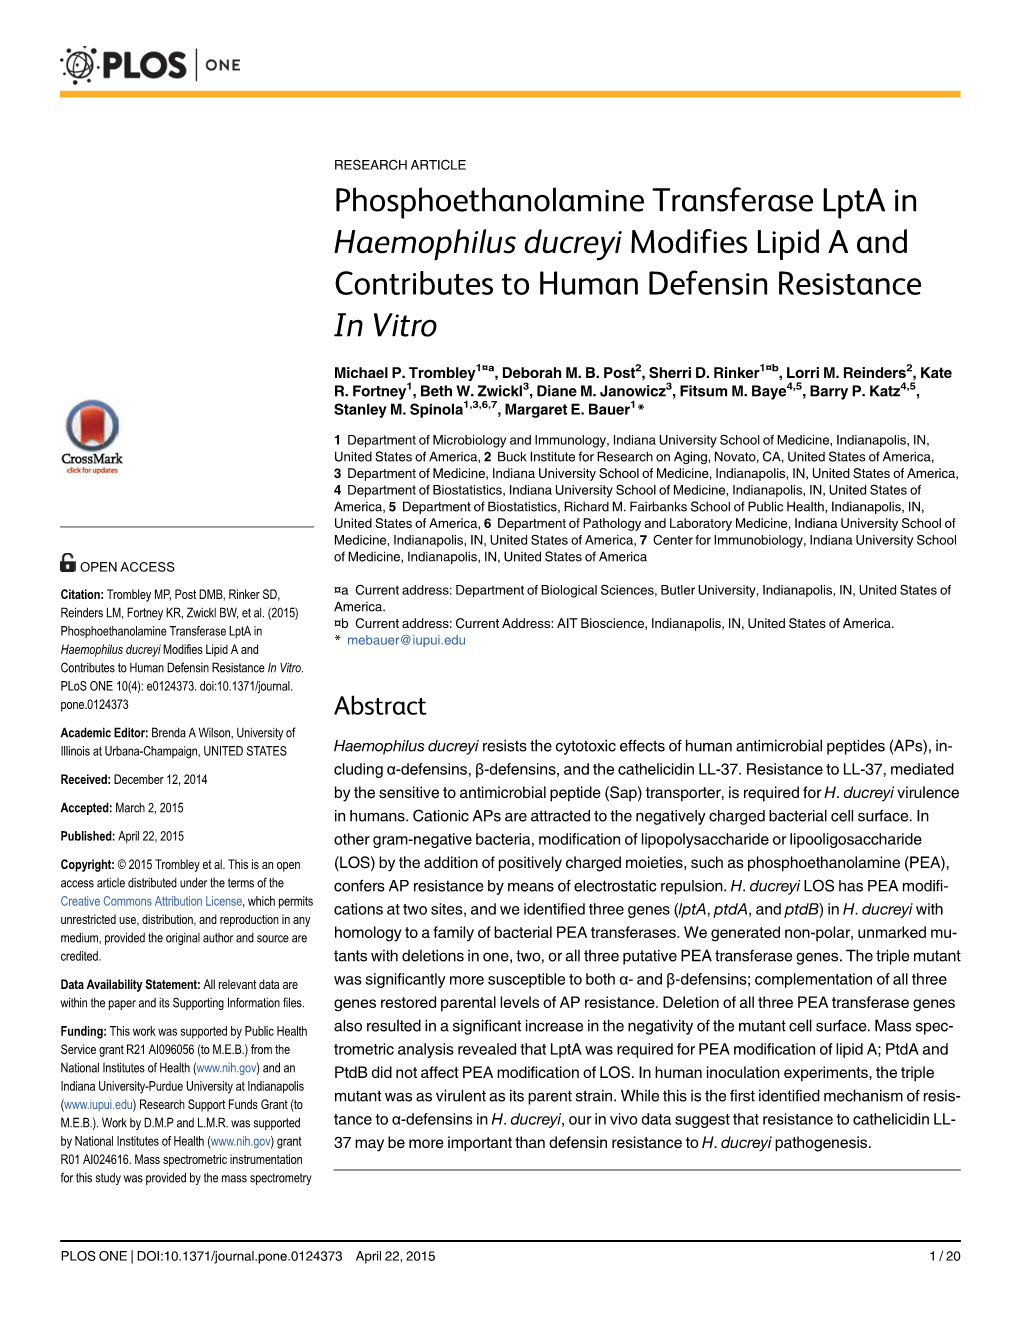 Phosphoethanolamine Transferase Lpta in Haemophilus Ducreyi Modifies Lipid a and Contributes to Human Defensin Resistance in Vitro